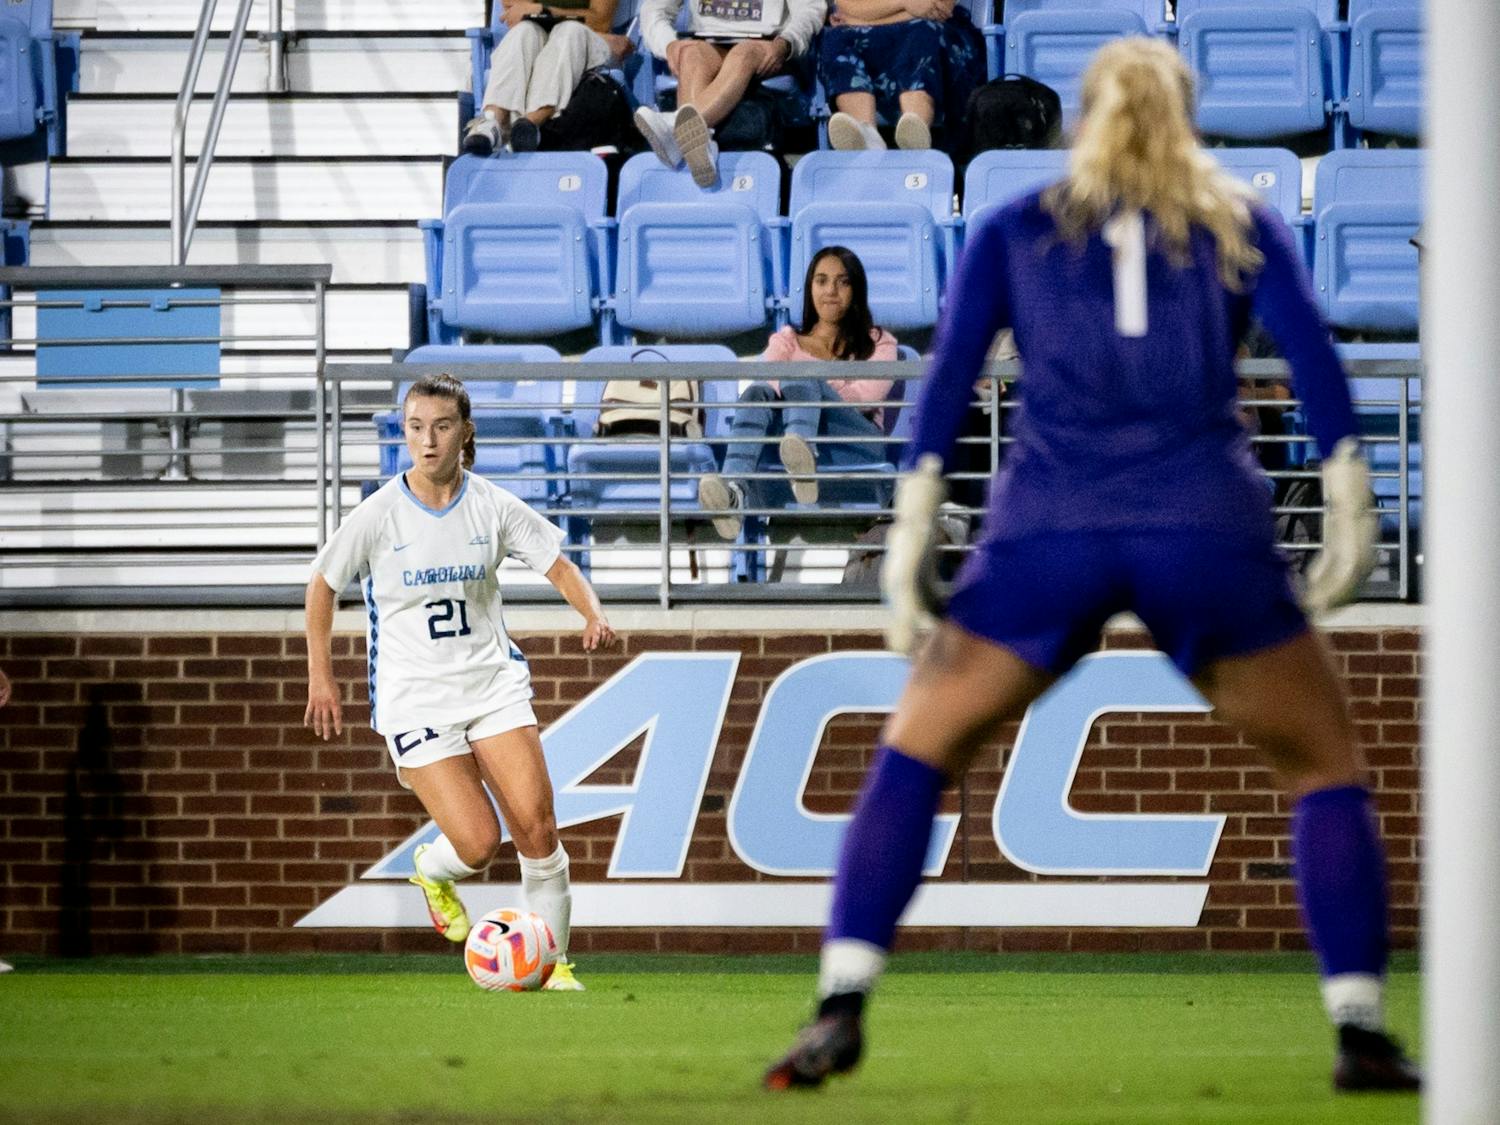 UNC freshman forward Ally Sentnor (21) handles the ball during the women's soccer game against Pittsburgh on Oct. 6, 2022 at Dorrance Field. UNC beat Pittsburgh 4-0.